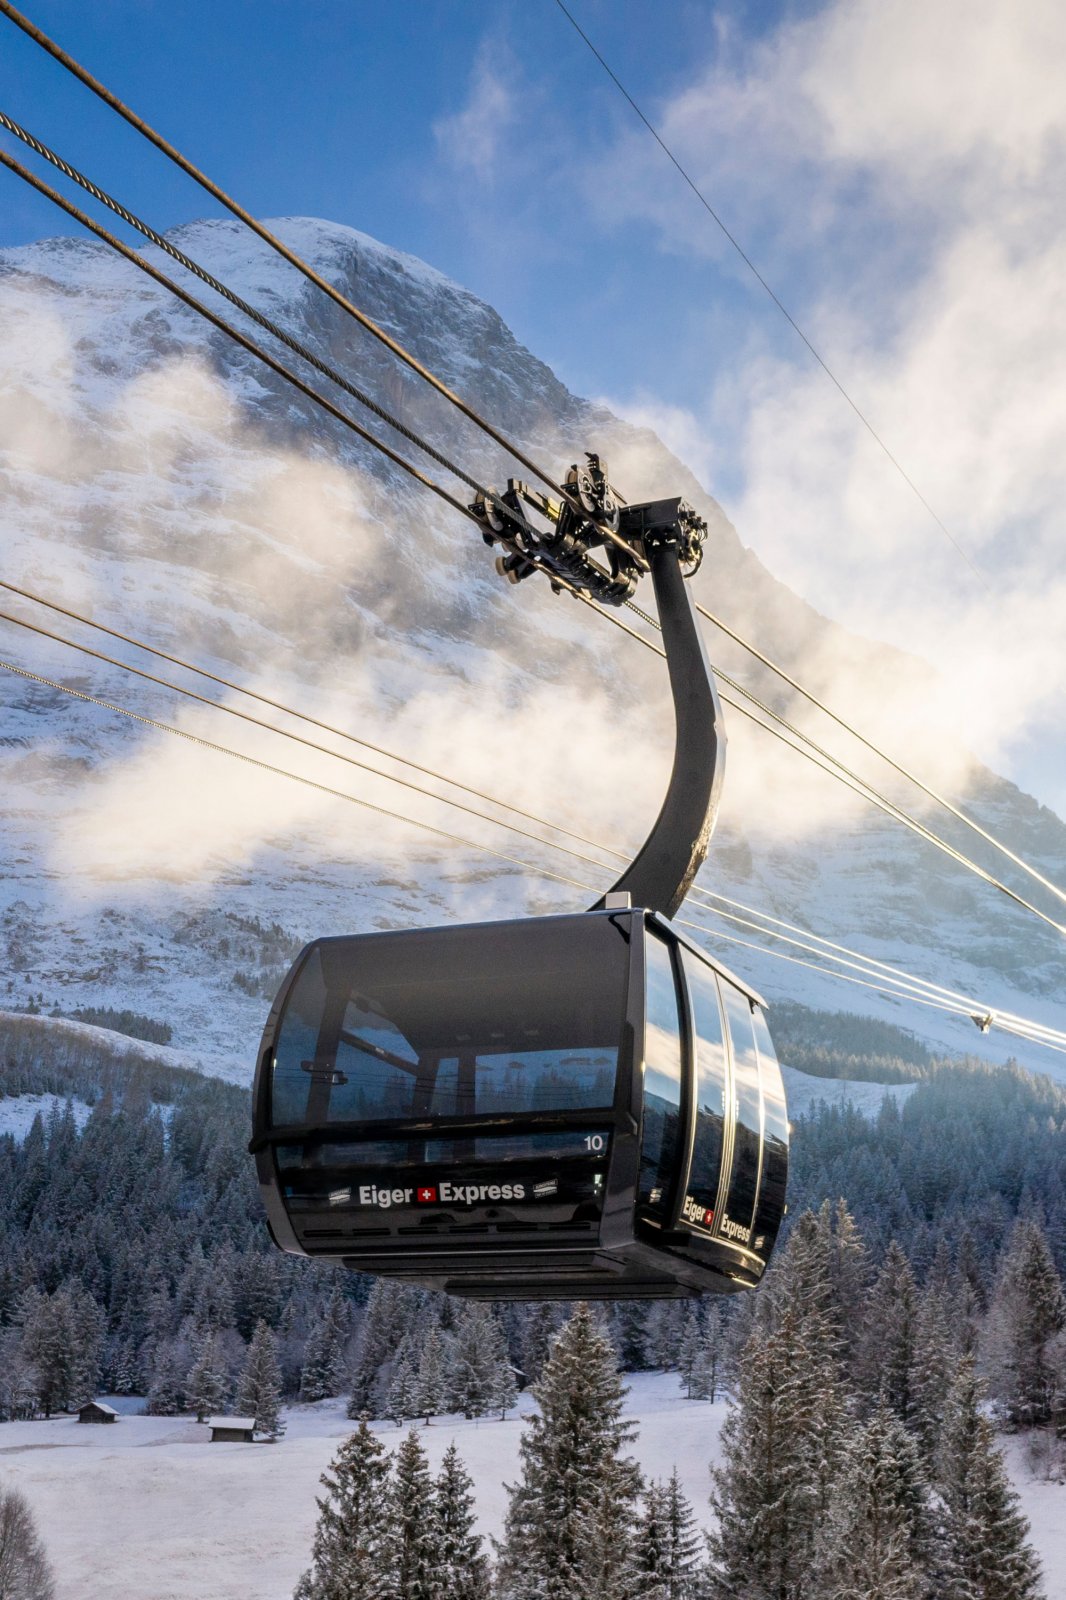 The Eiger Express 3S Cable Car connects Grindelwald and the Eiger Glacier station